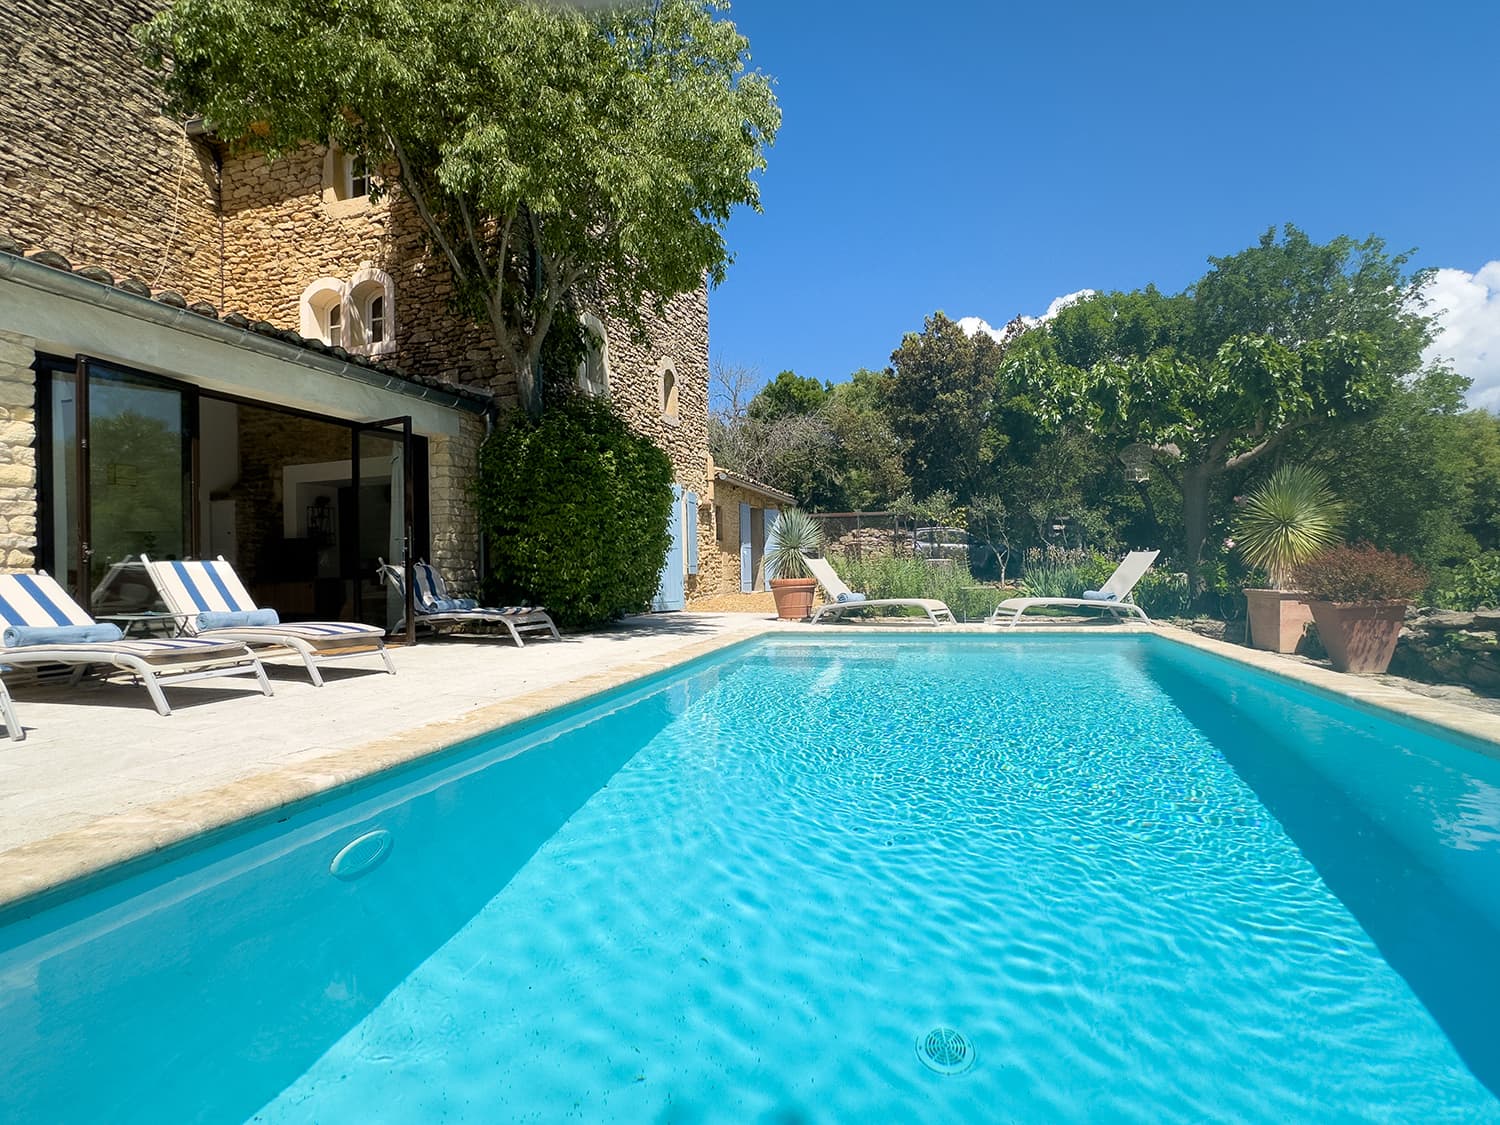 Holiday cottage near Gordes with private pool